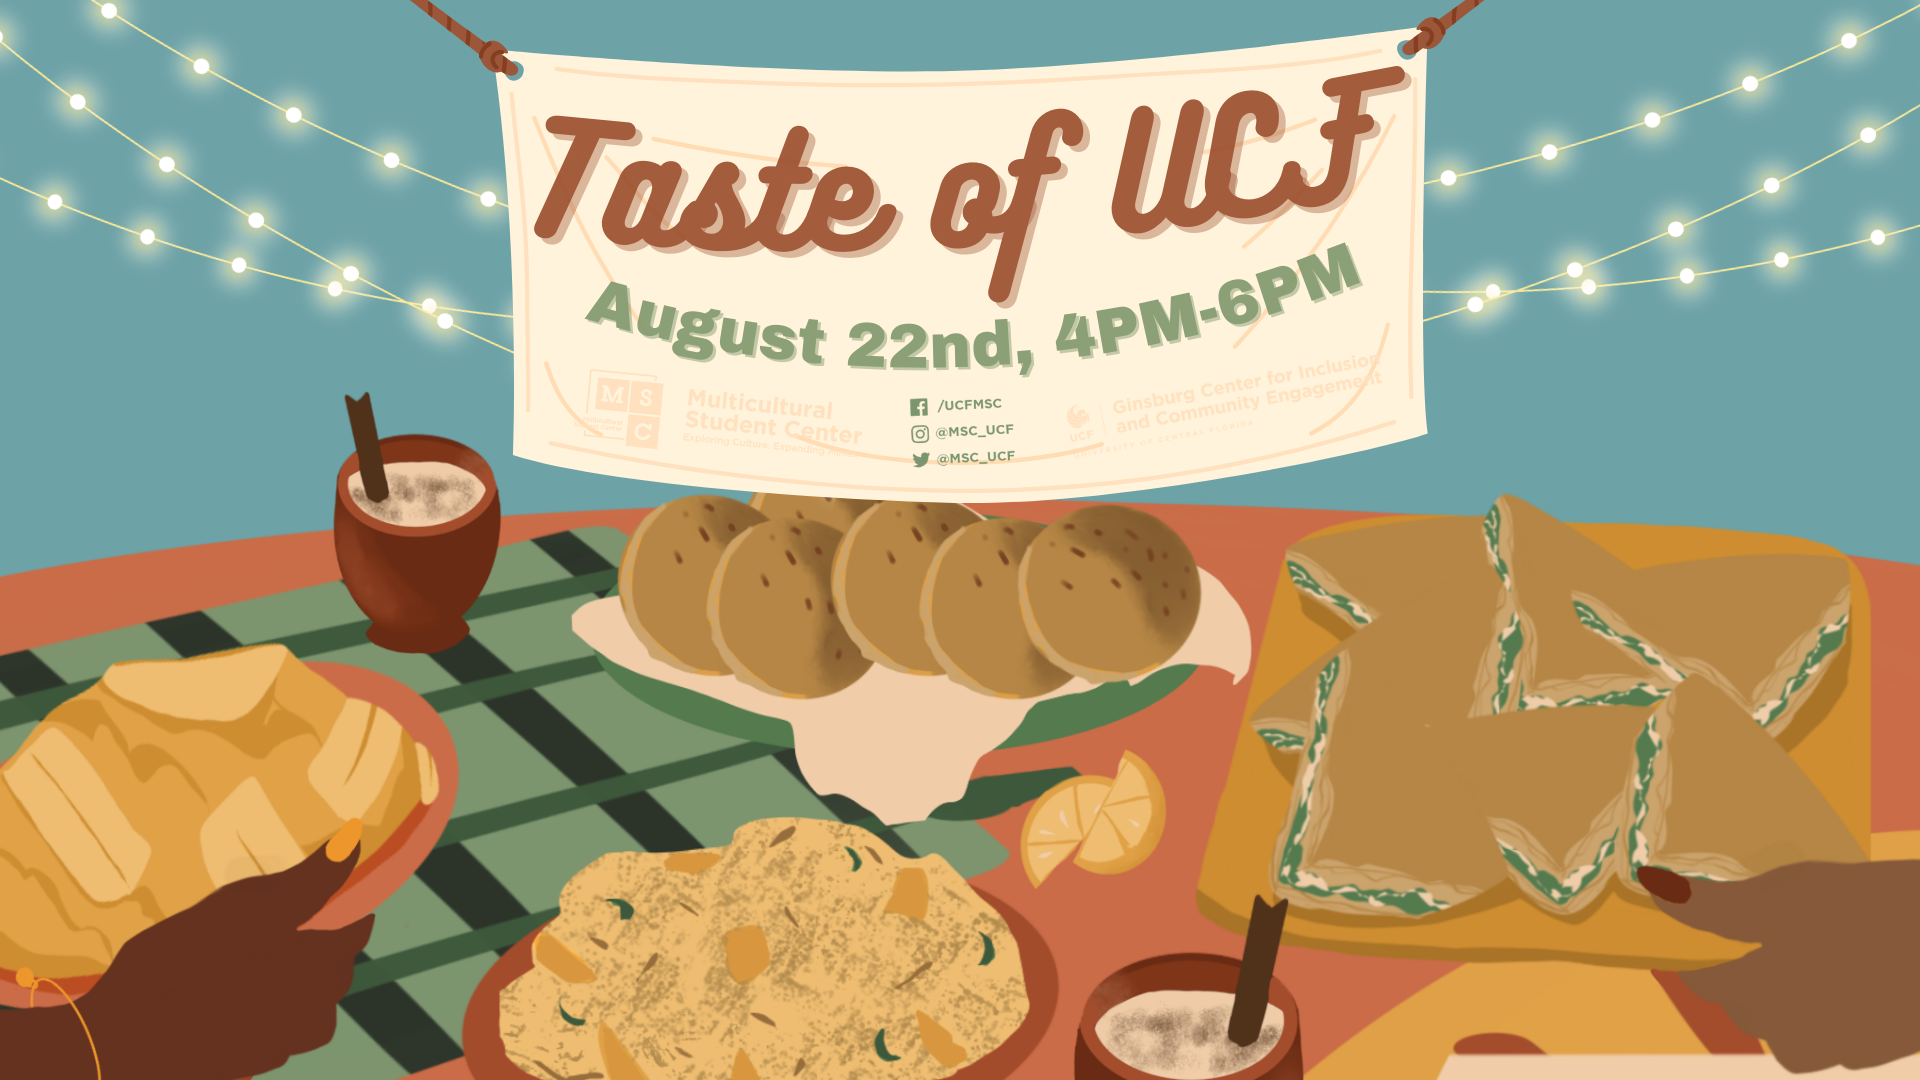 Illustration of the food on the table and the banner it, saying Taste of UCF, August 22nd, 2pm-6pm 